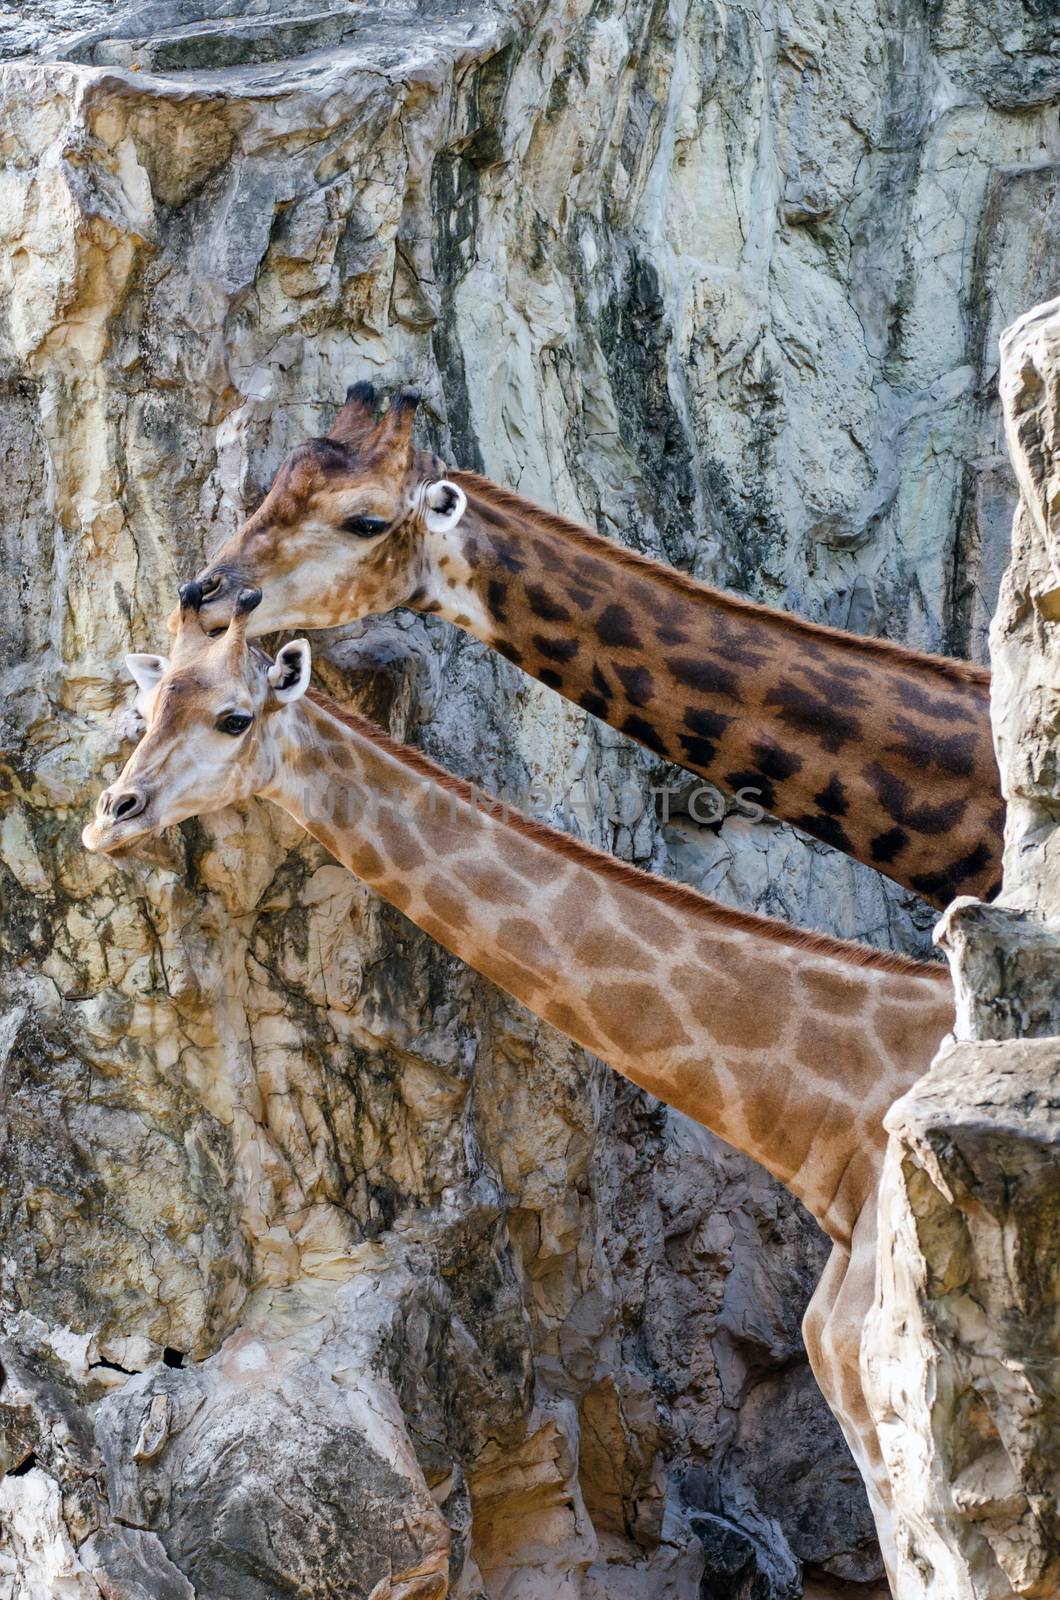 Two giraffes in zoo, Thailand